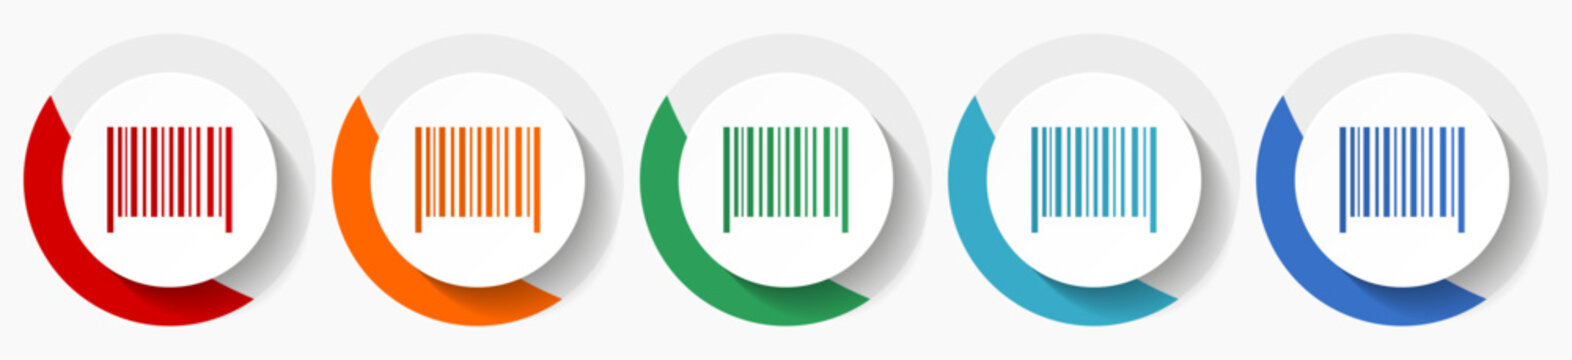 Barcode vector icon set, flat design colorful round icons in 5 color options for webdesign and mobile applications